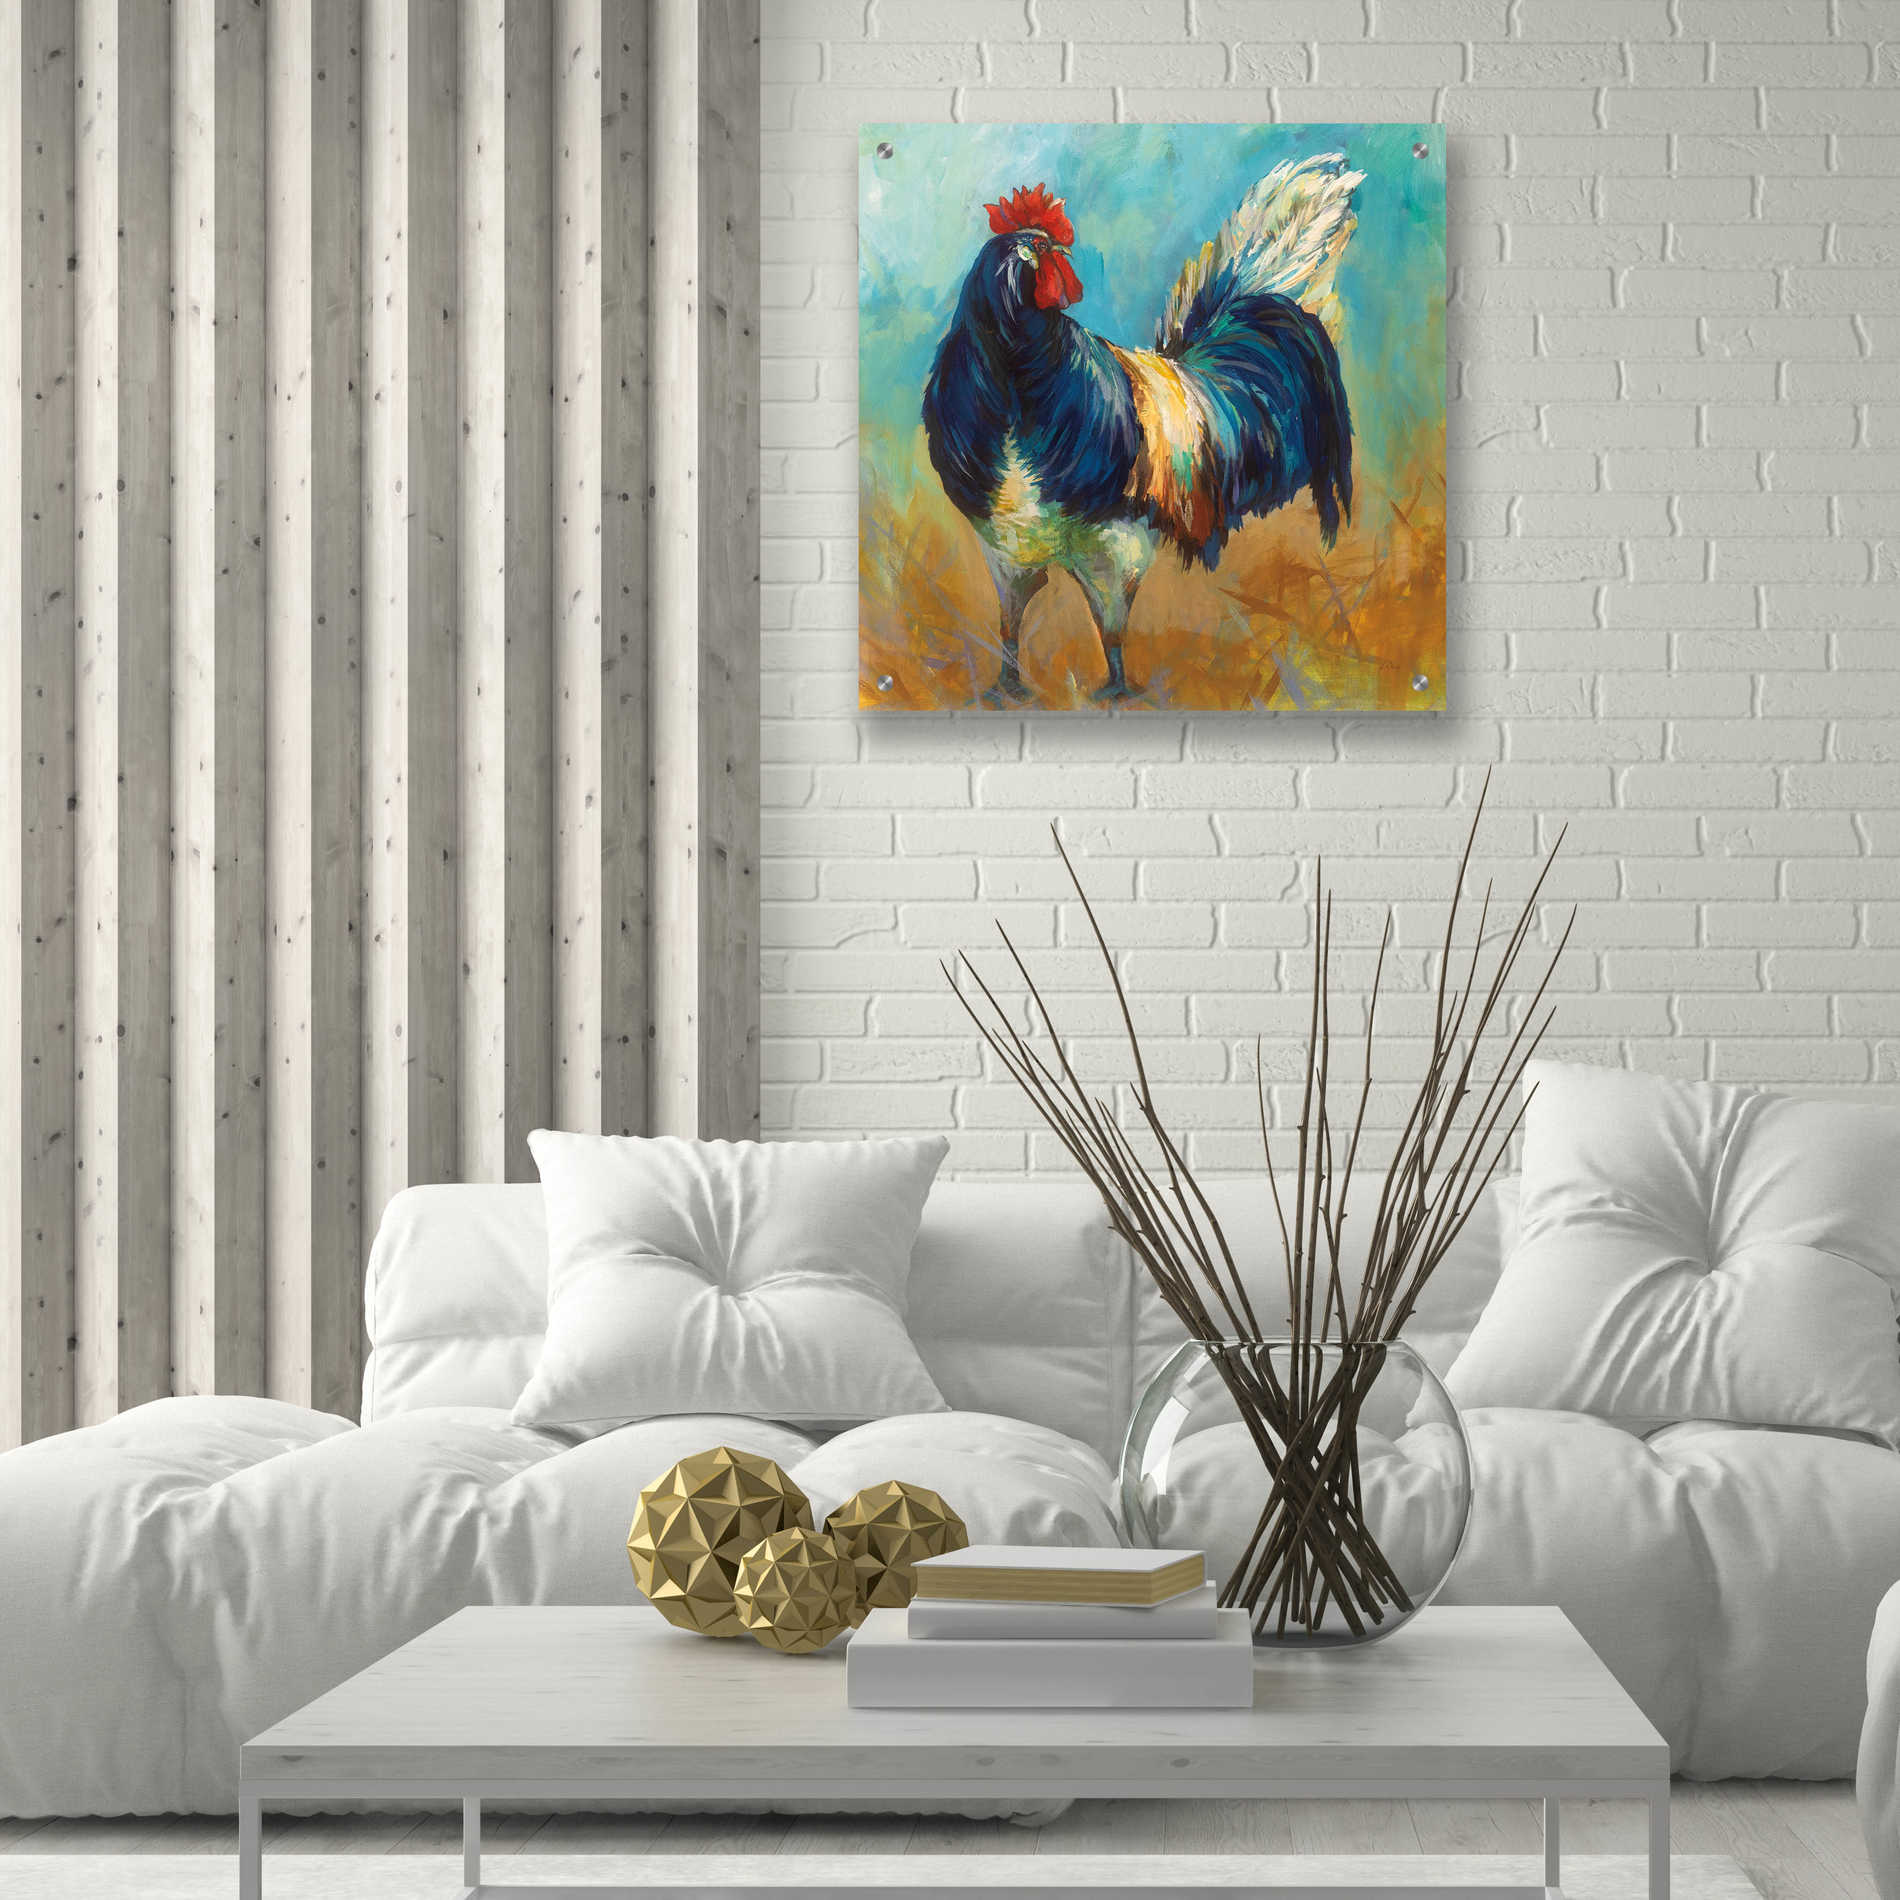 Epic Art 'Cocky' by Jeanette Vertentes, Acrylic Glass Wall Art,24x24